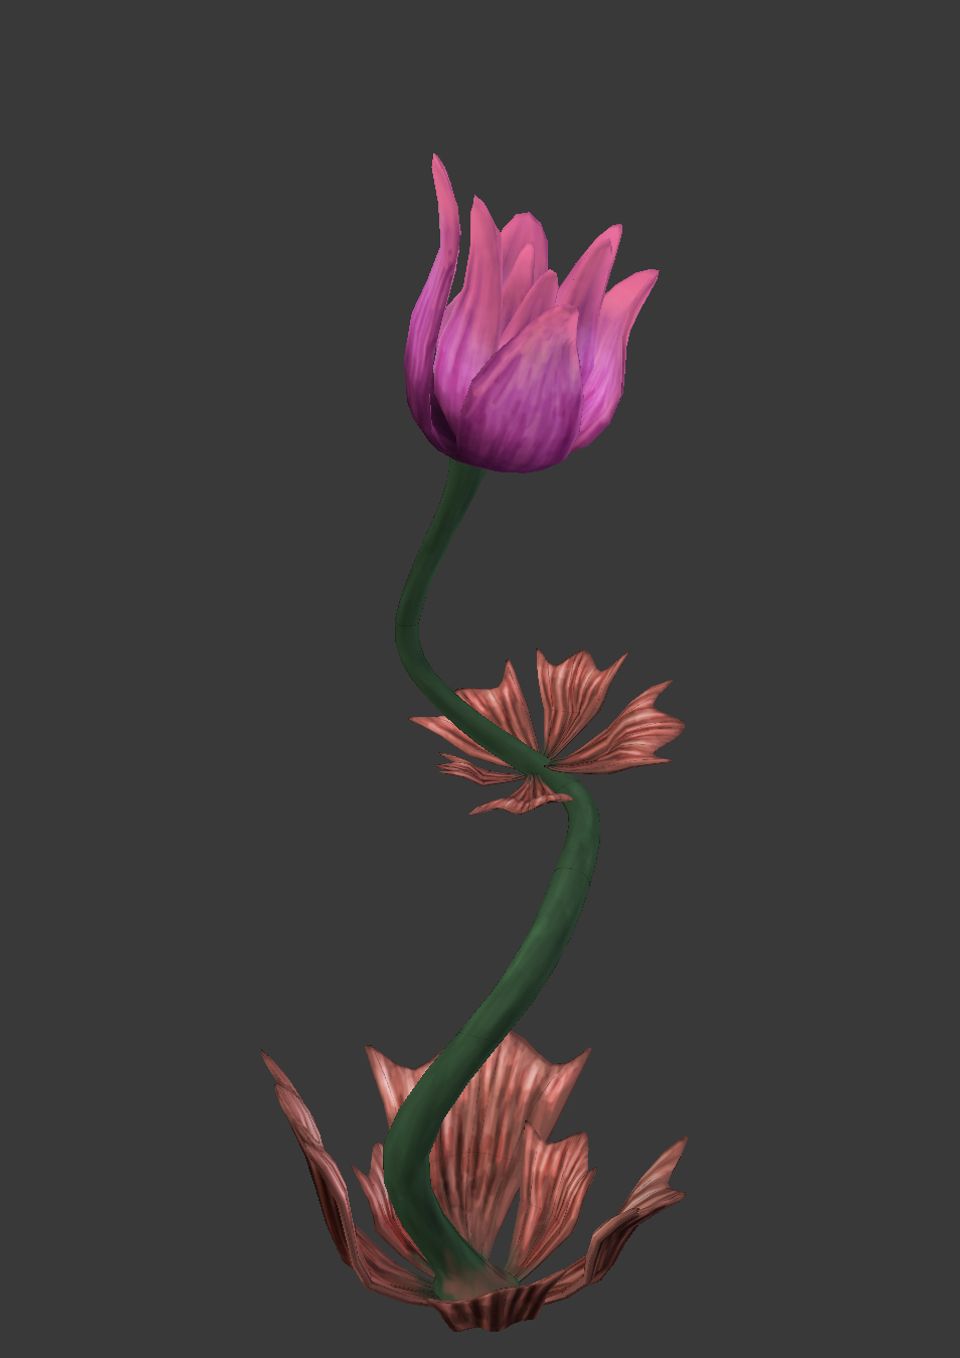 A digital reproduction of a flower.